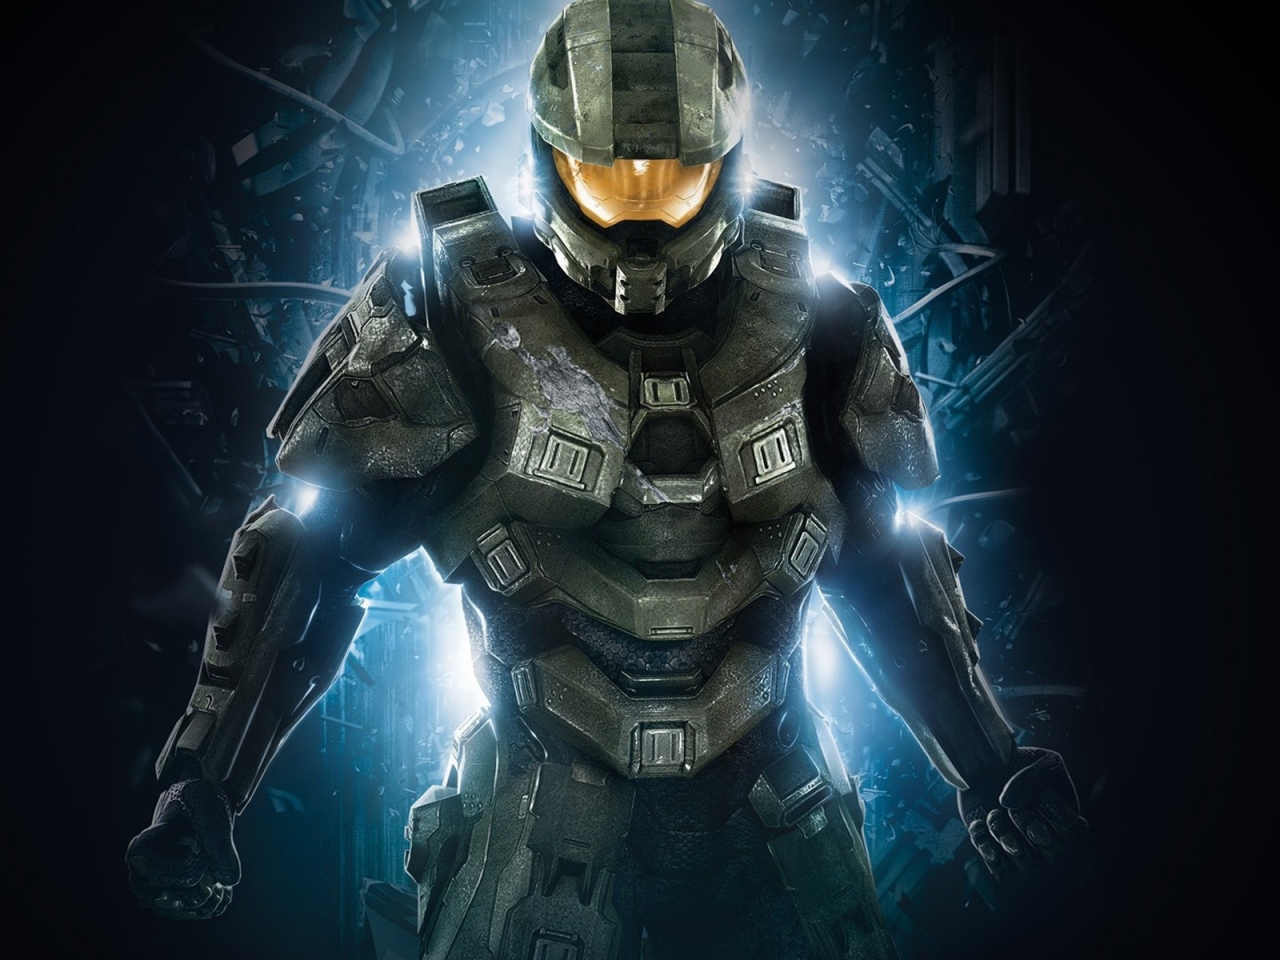 Halo Character for 1280 x 960 resolution